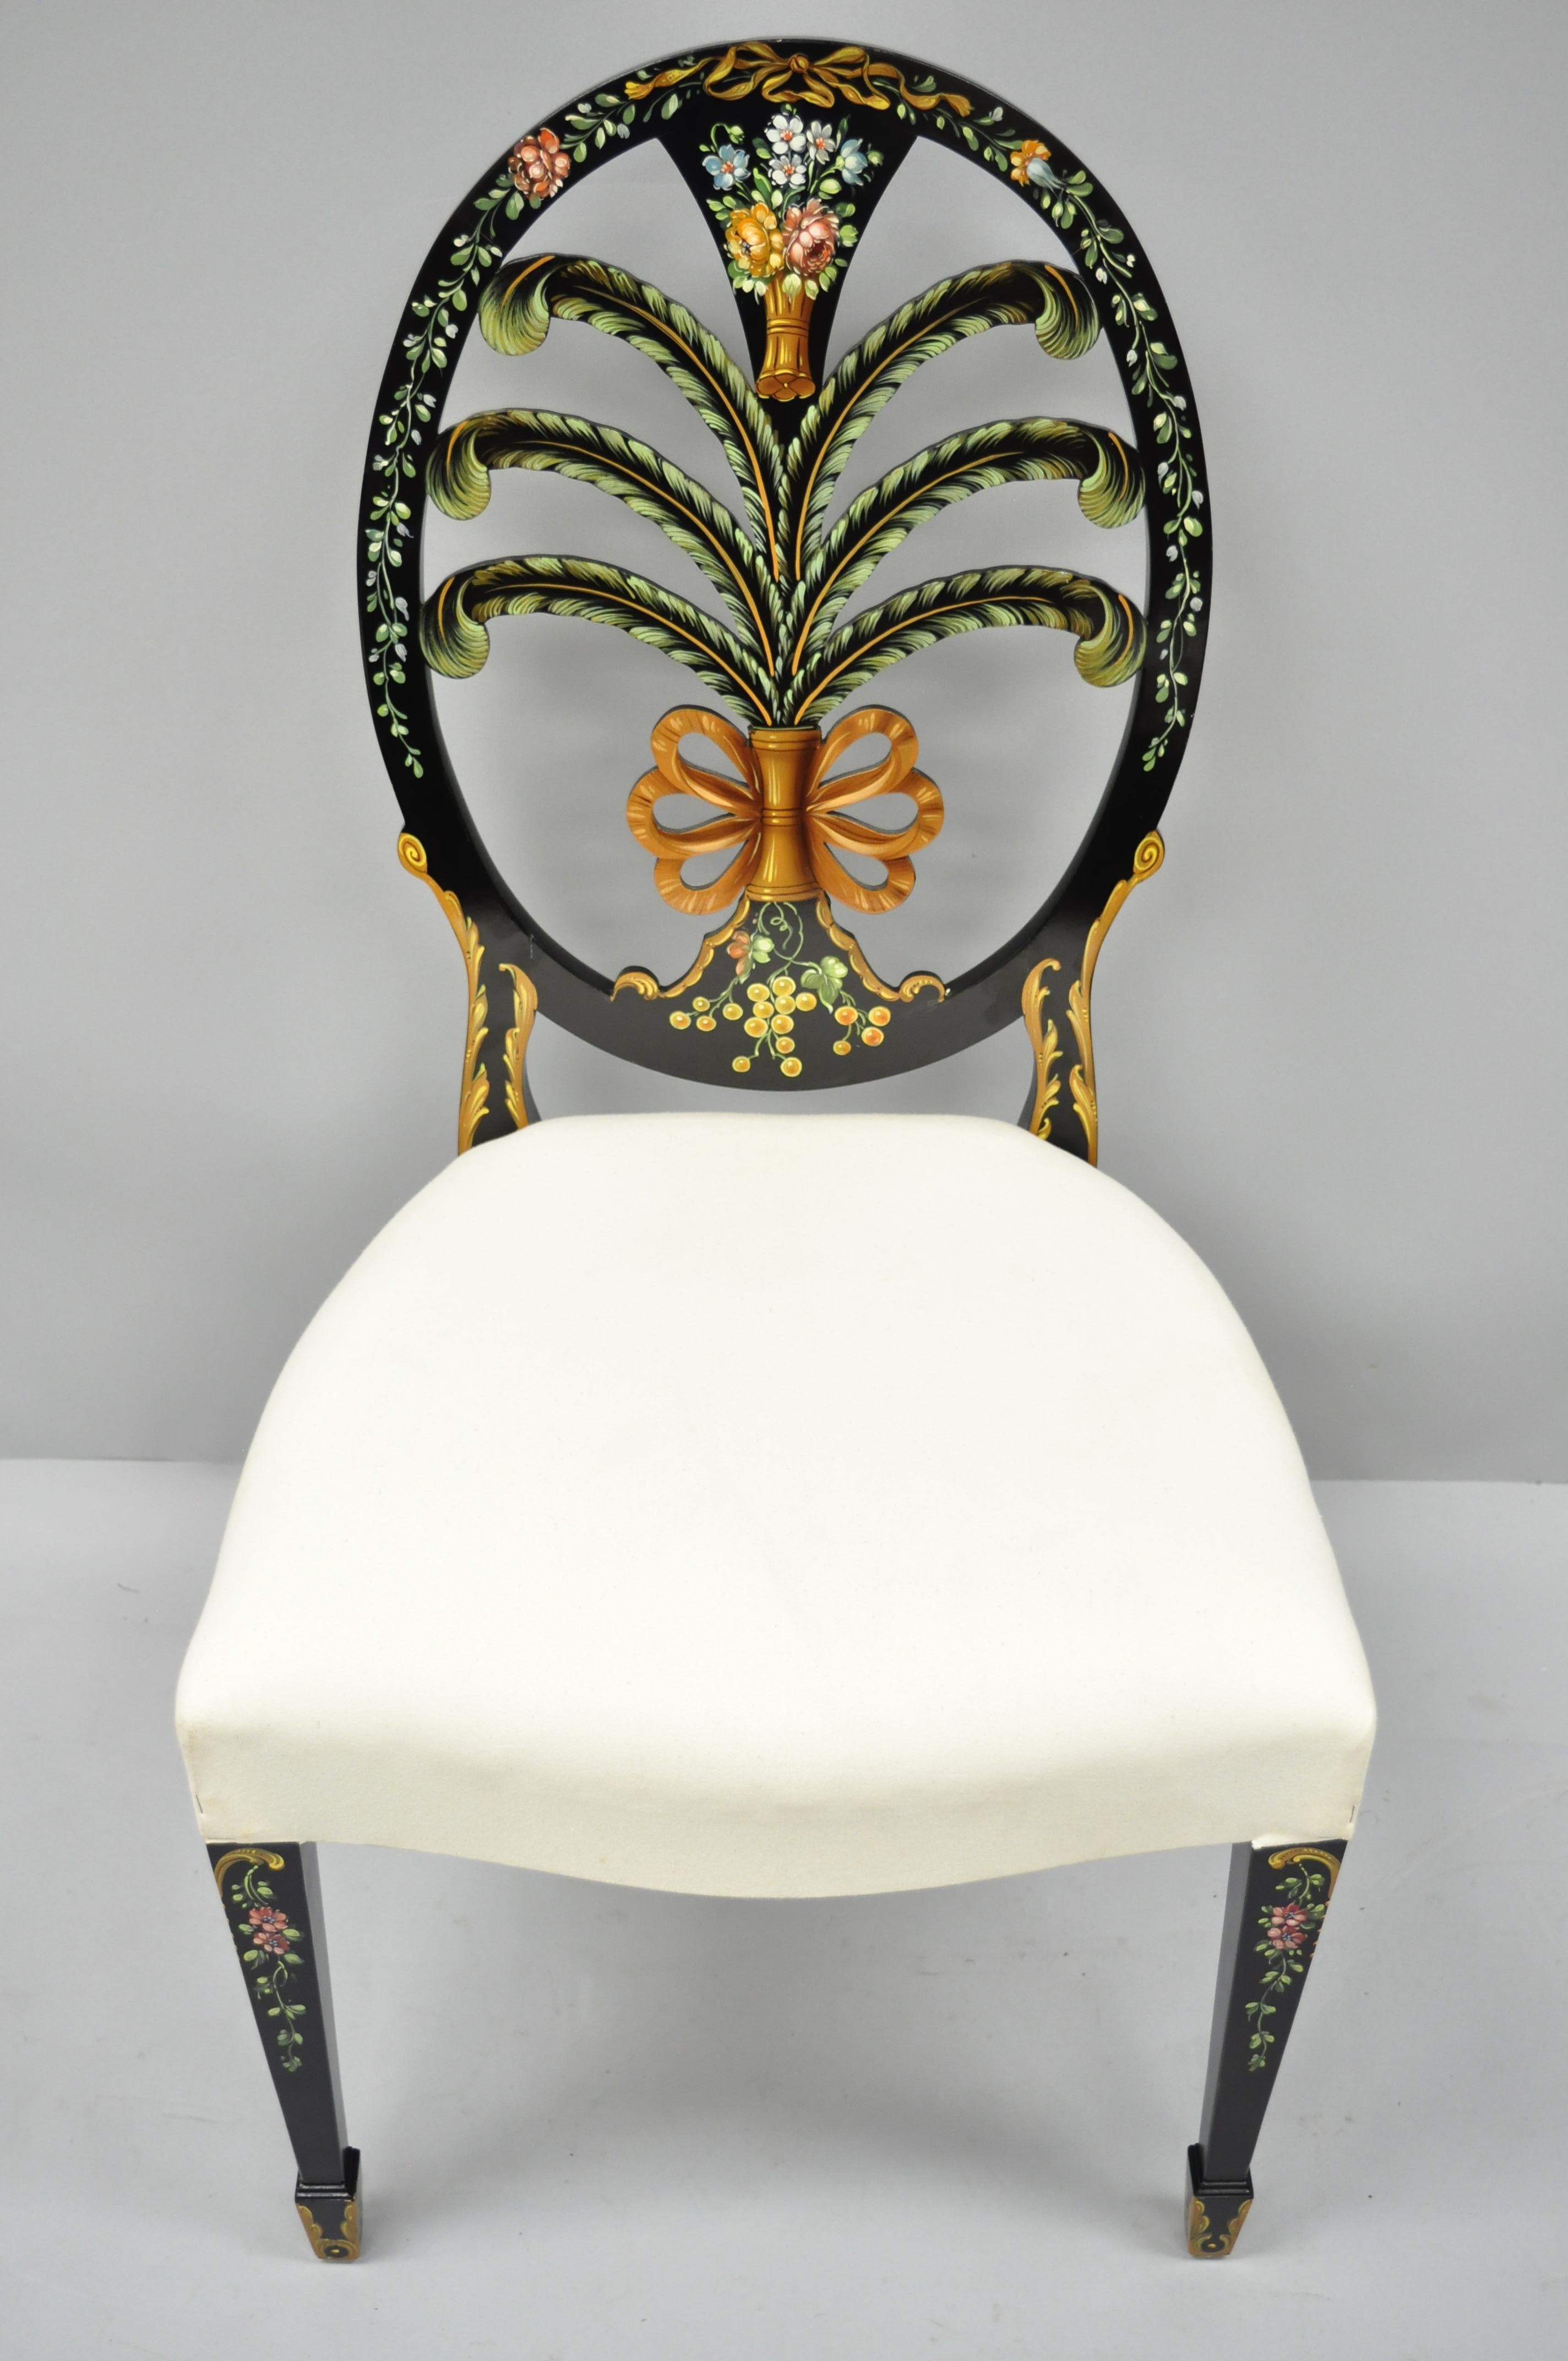 20th Century Karges Hepplewhite Adams Style Hand Painted Prince of Wales Plume Side Chair